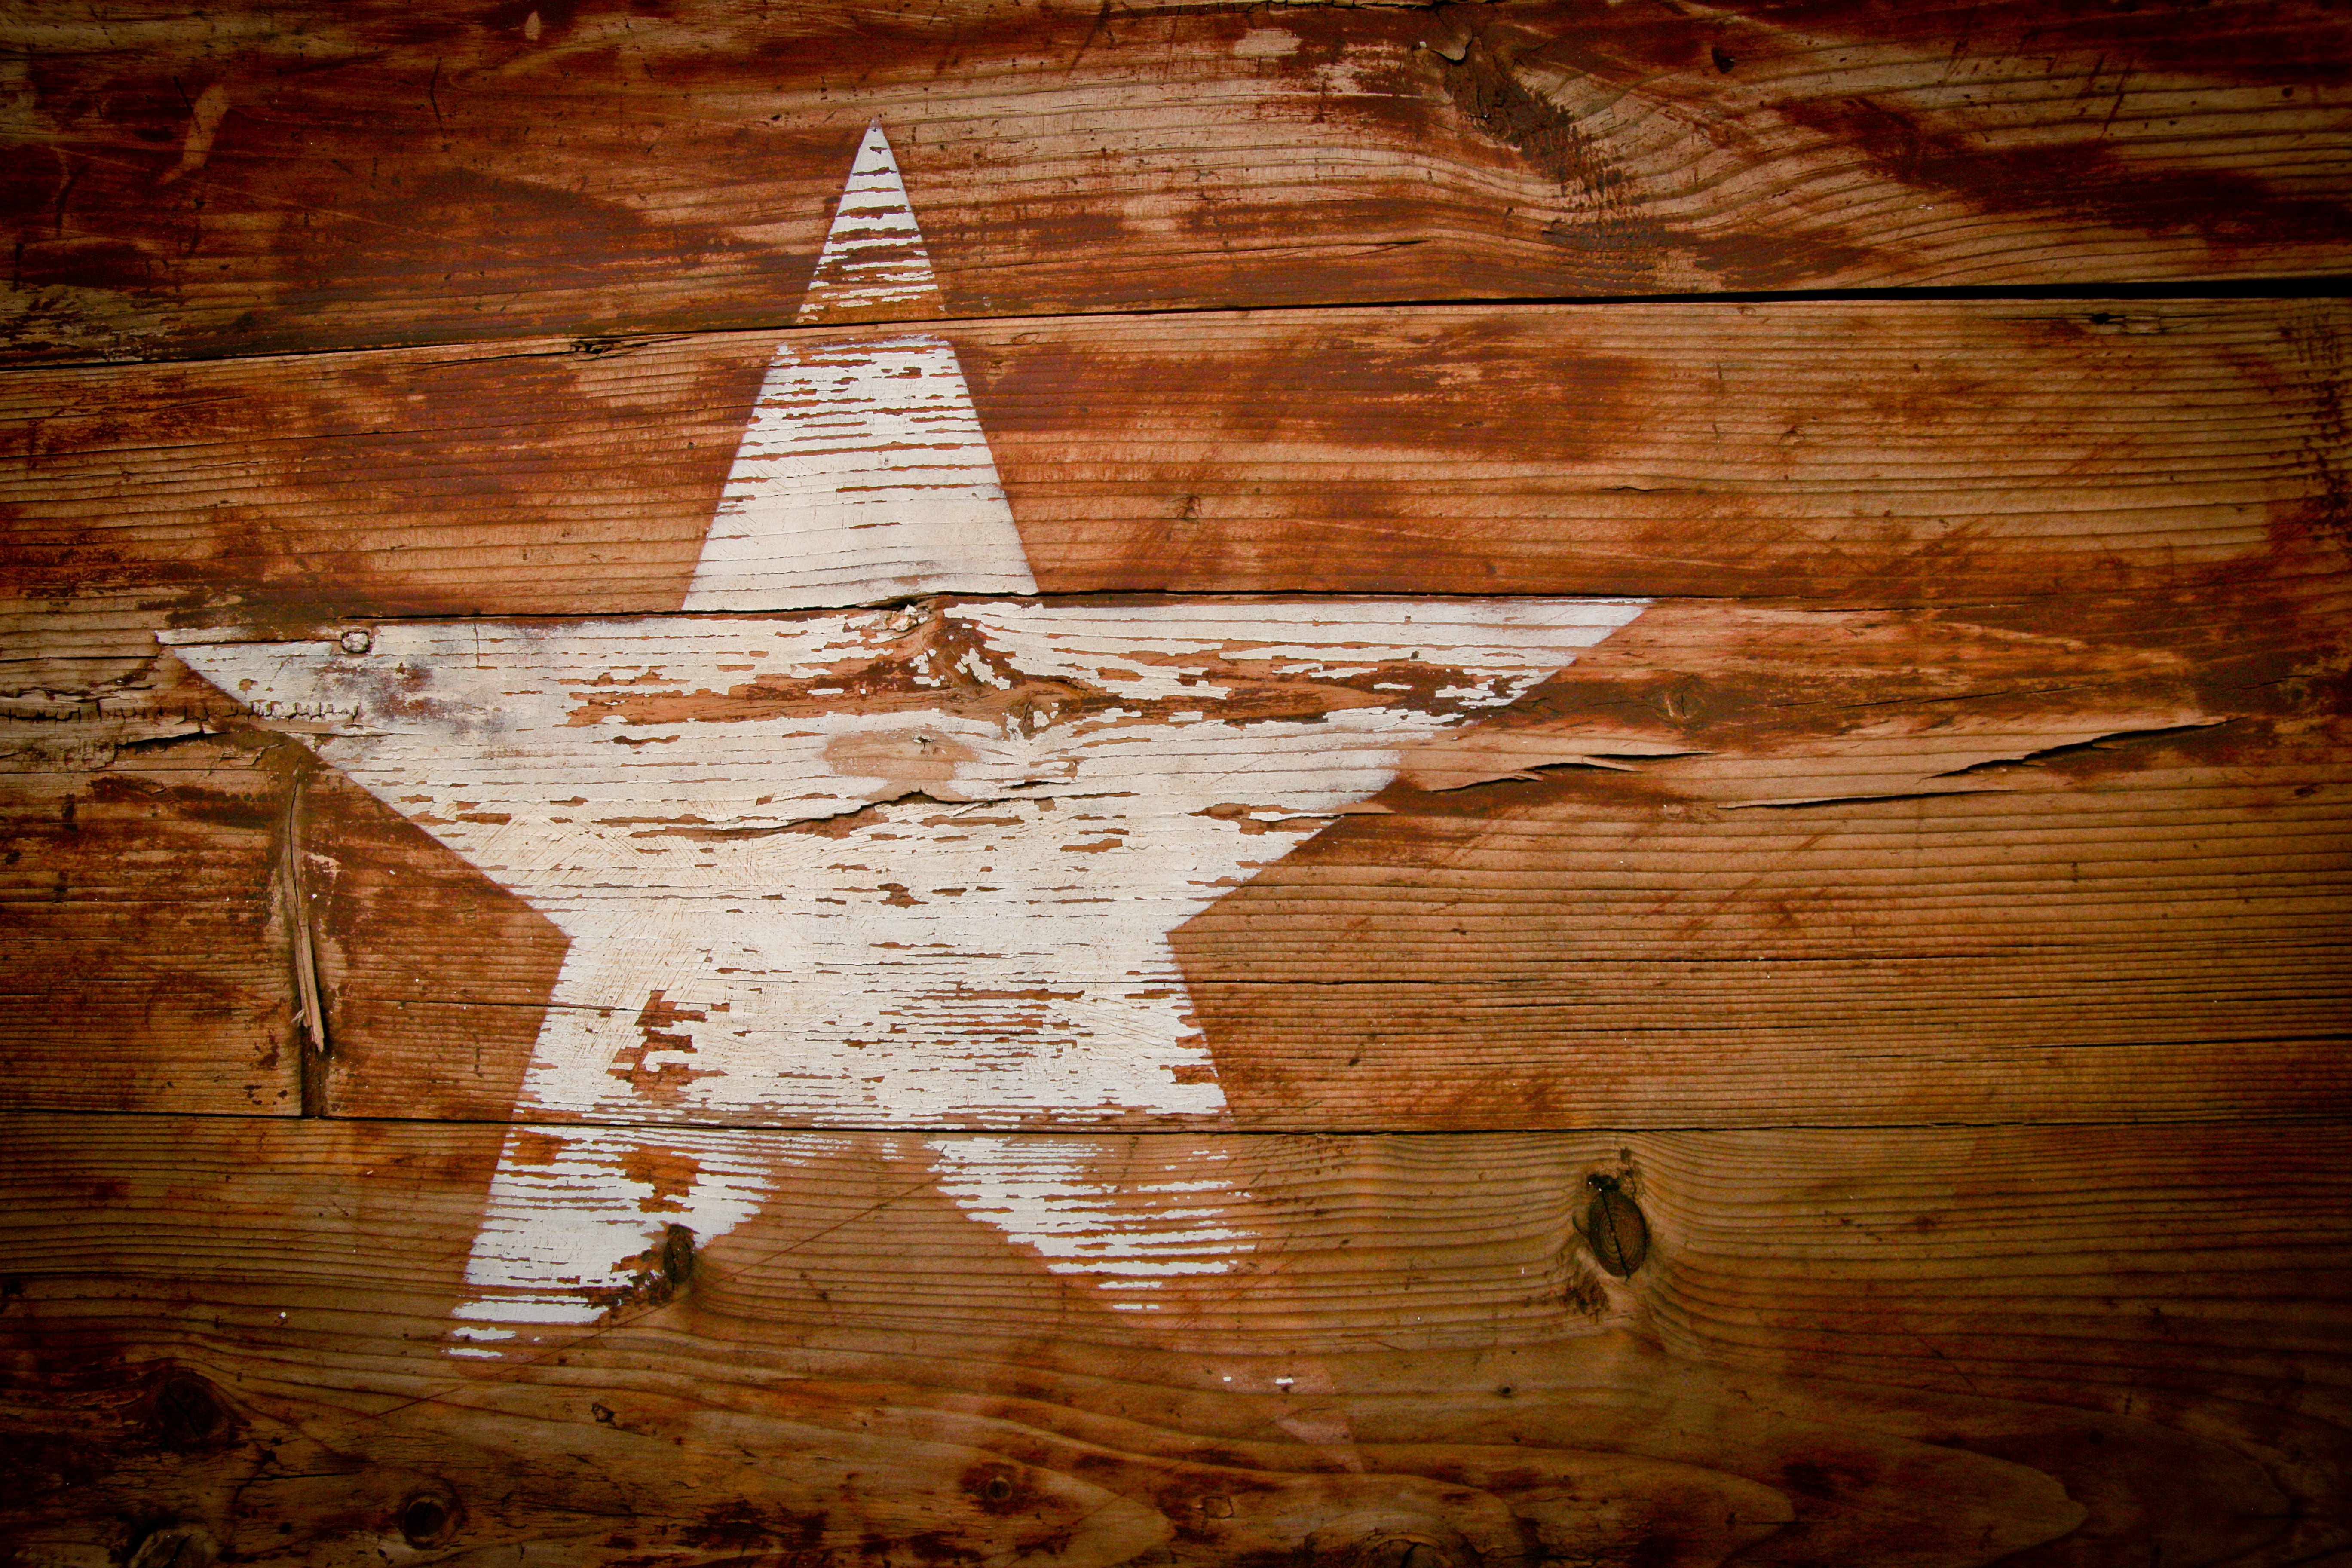 Travel to Texas & Discover The Lone Star State